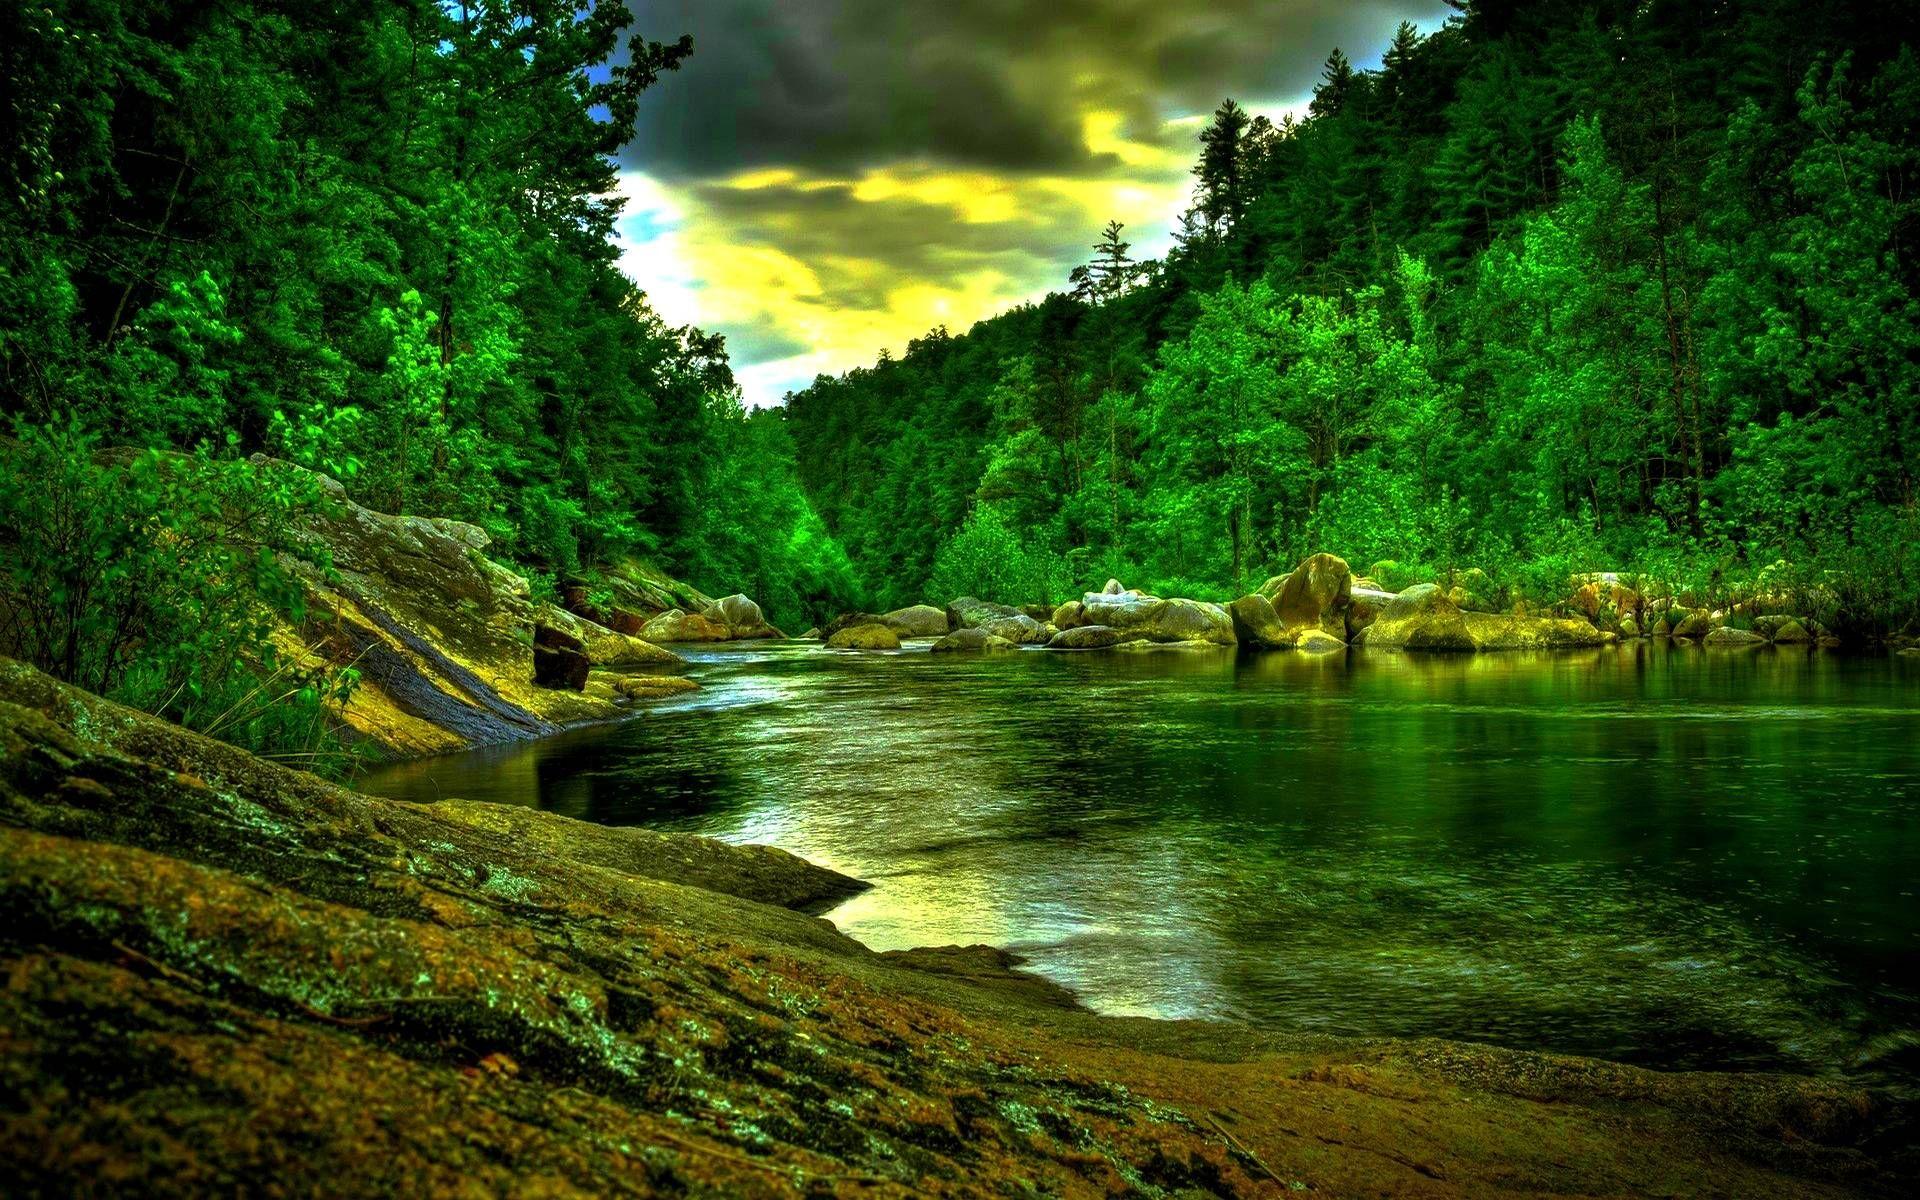 Rainforest Wallpaper 1080p #tjz. Earth. Forest background, Forest